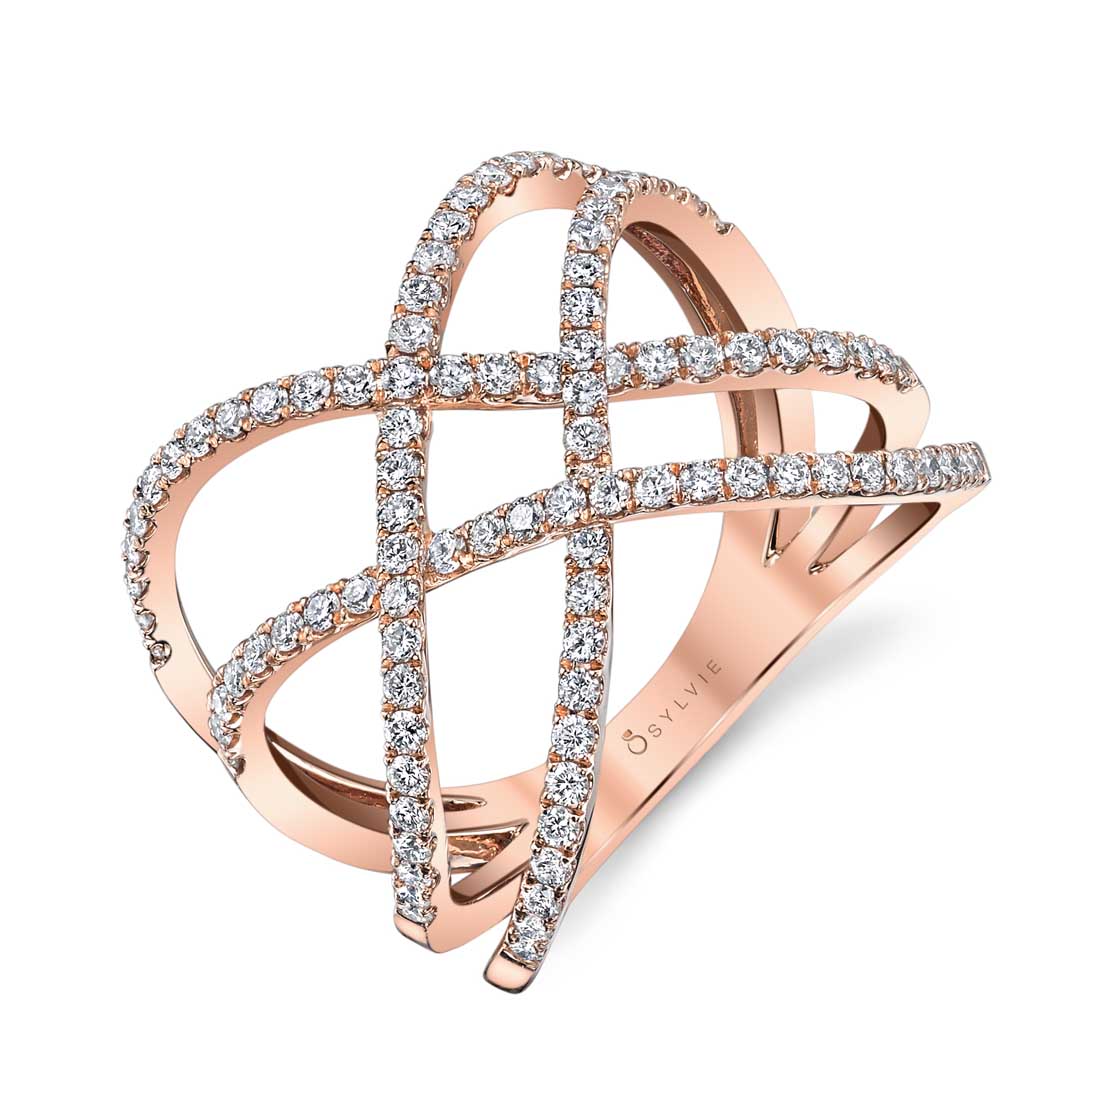 Free Form Diamond Ring in Rose Gold